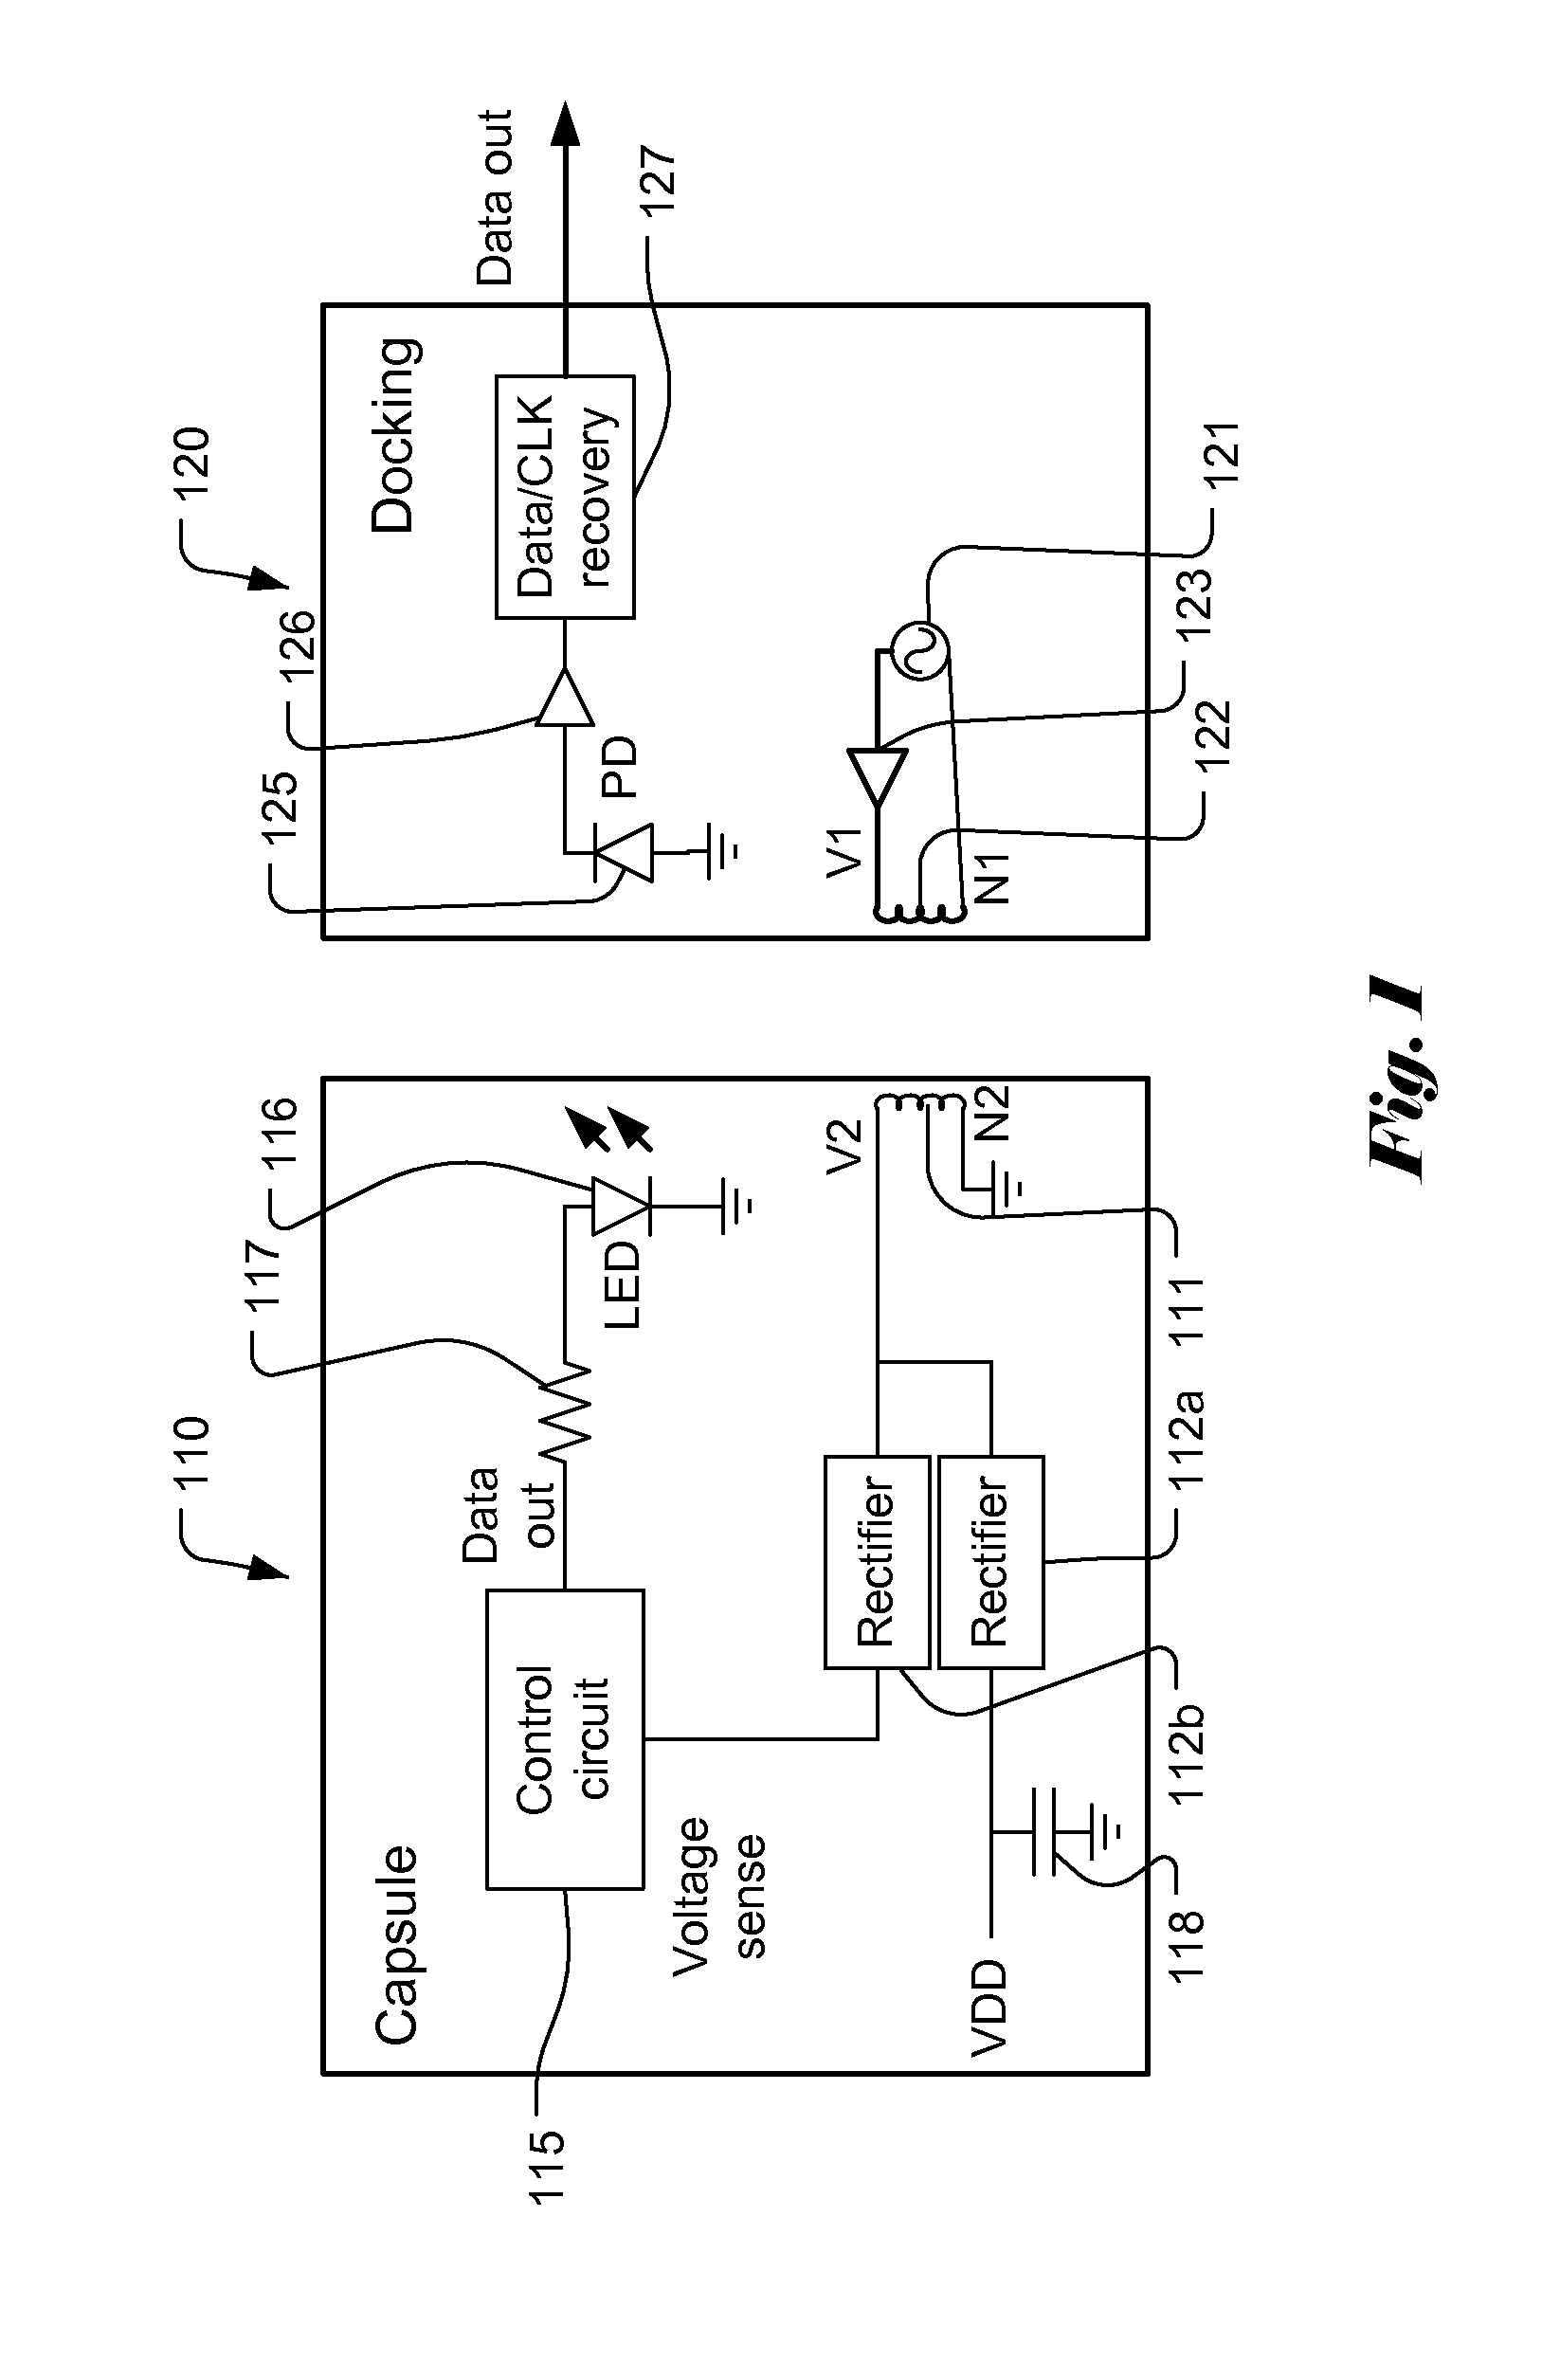 Capsule Orientation Detection for Capsule Docking System with Inductive Power Drive Circuit